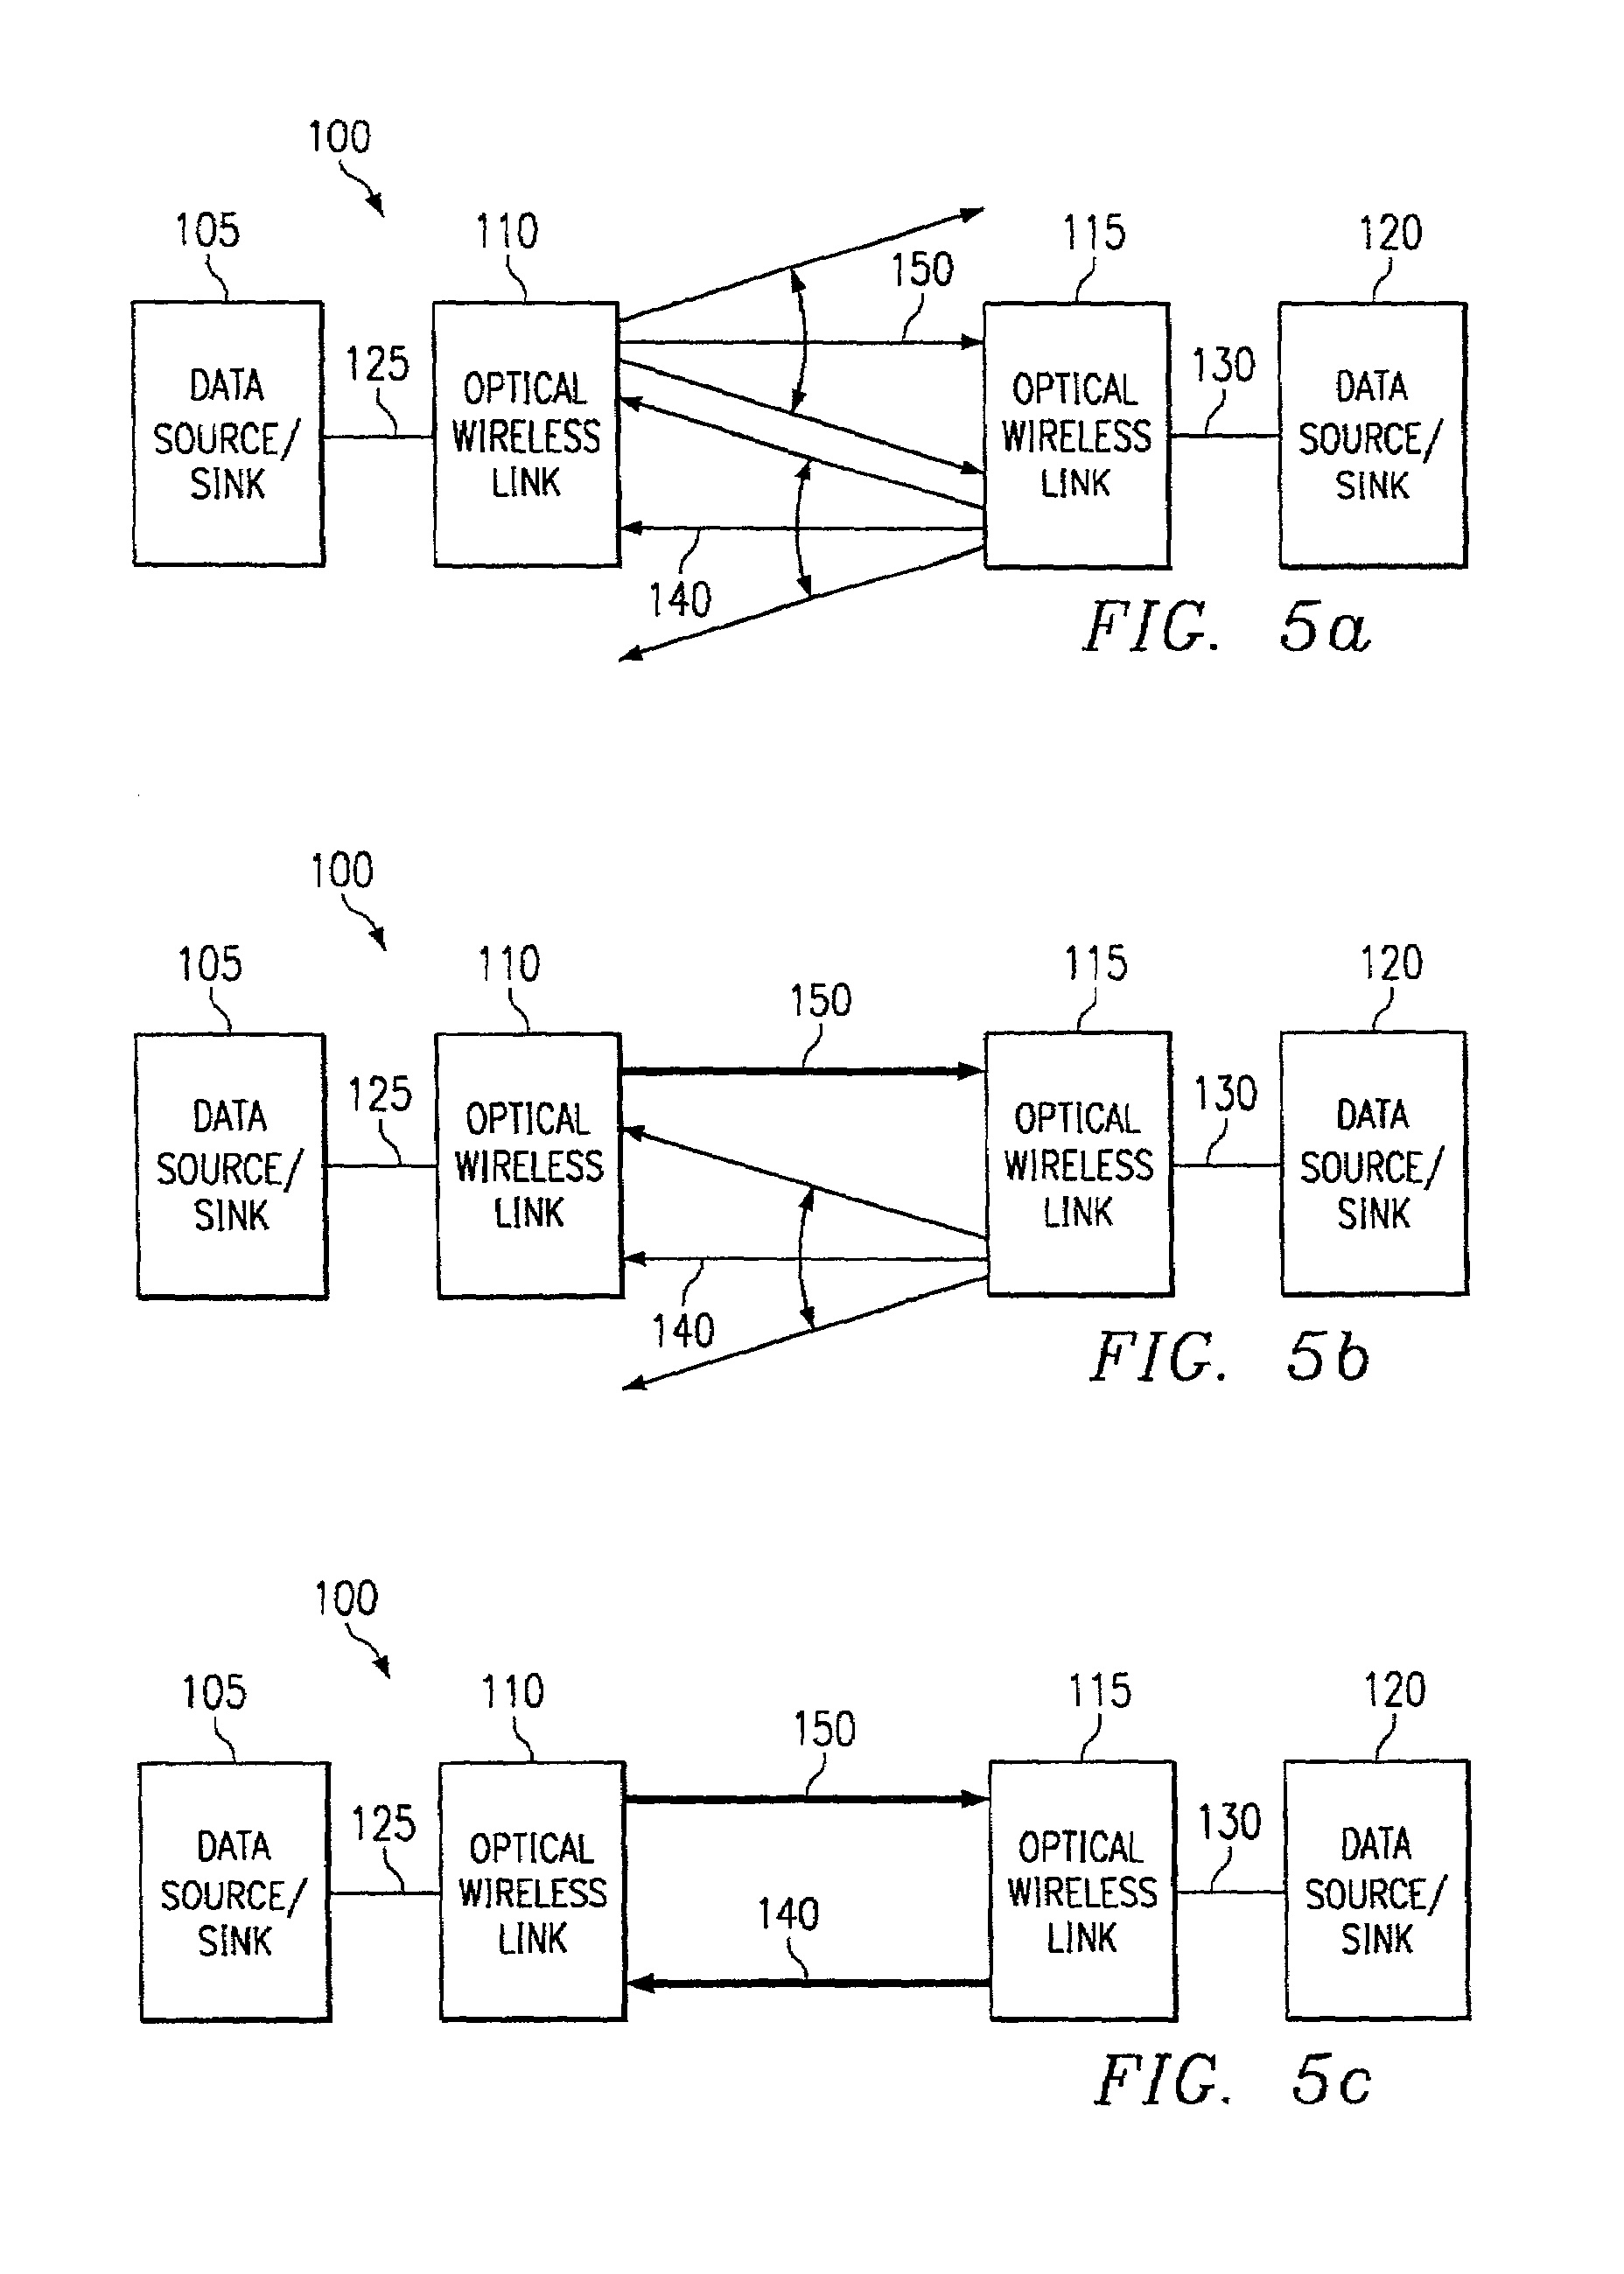 Reflection detection in an optical wireless link